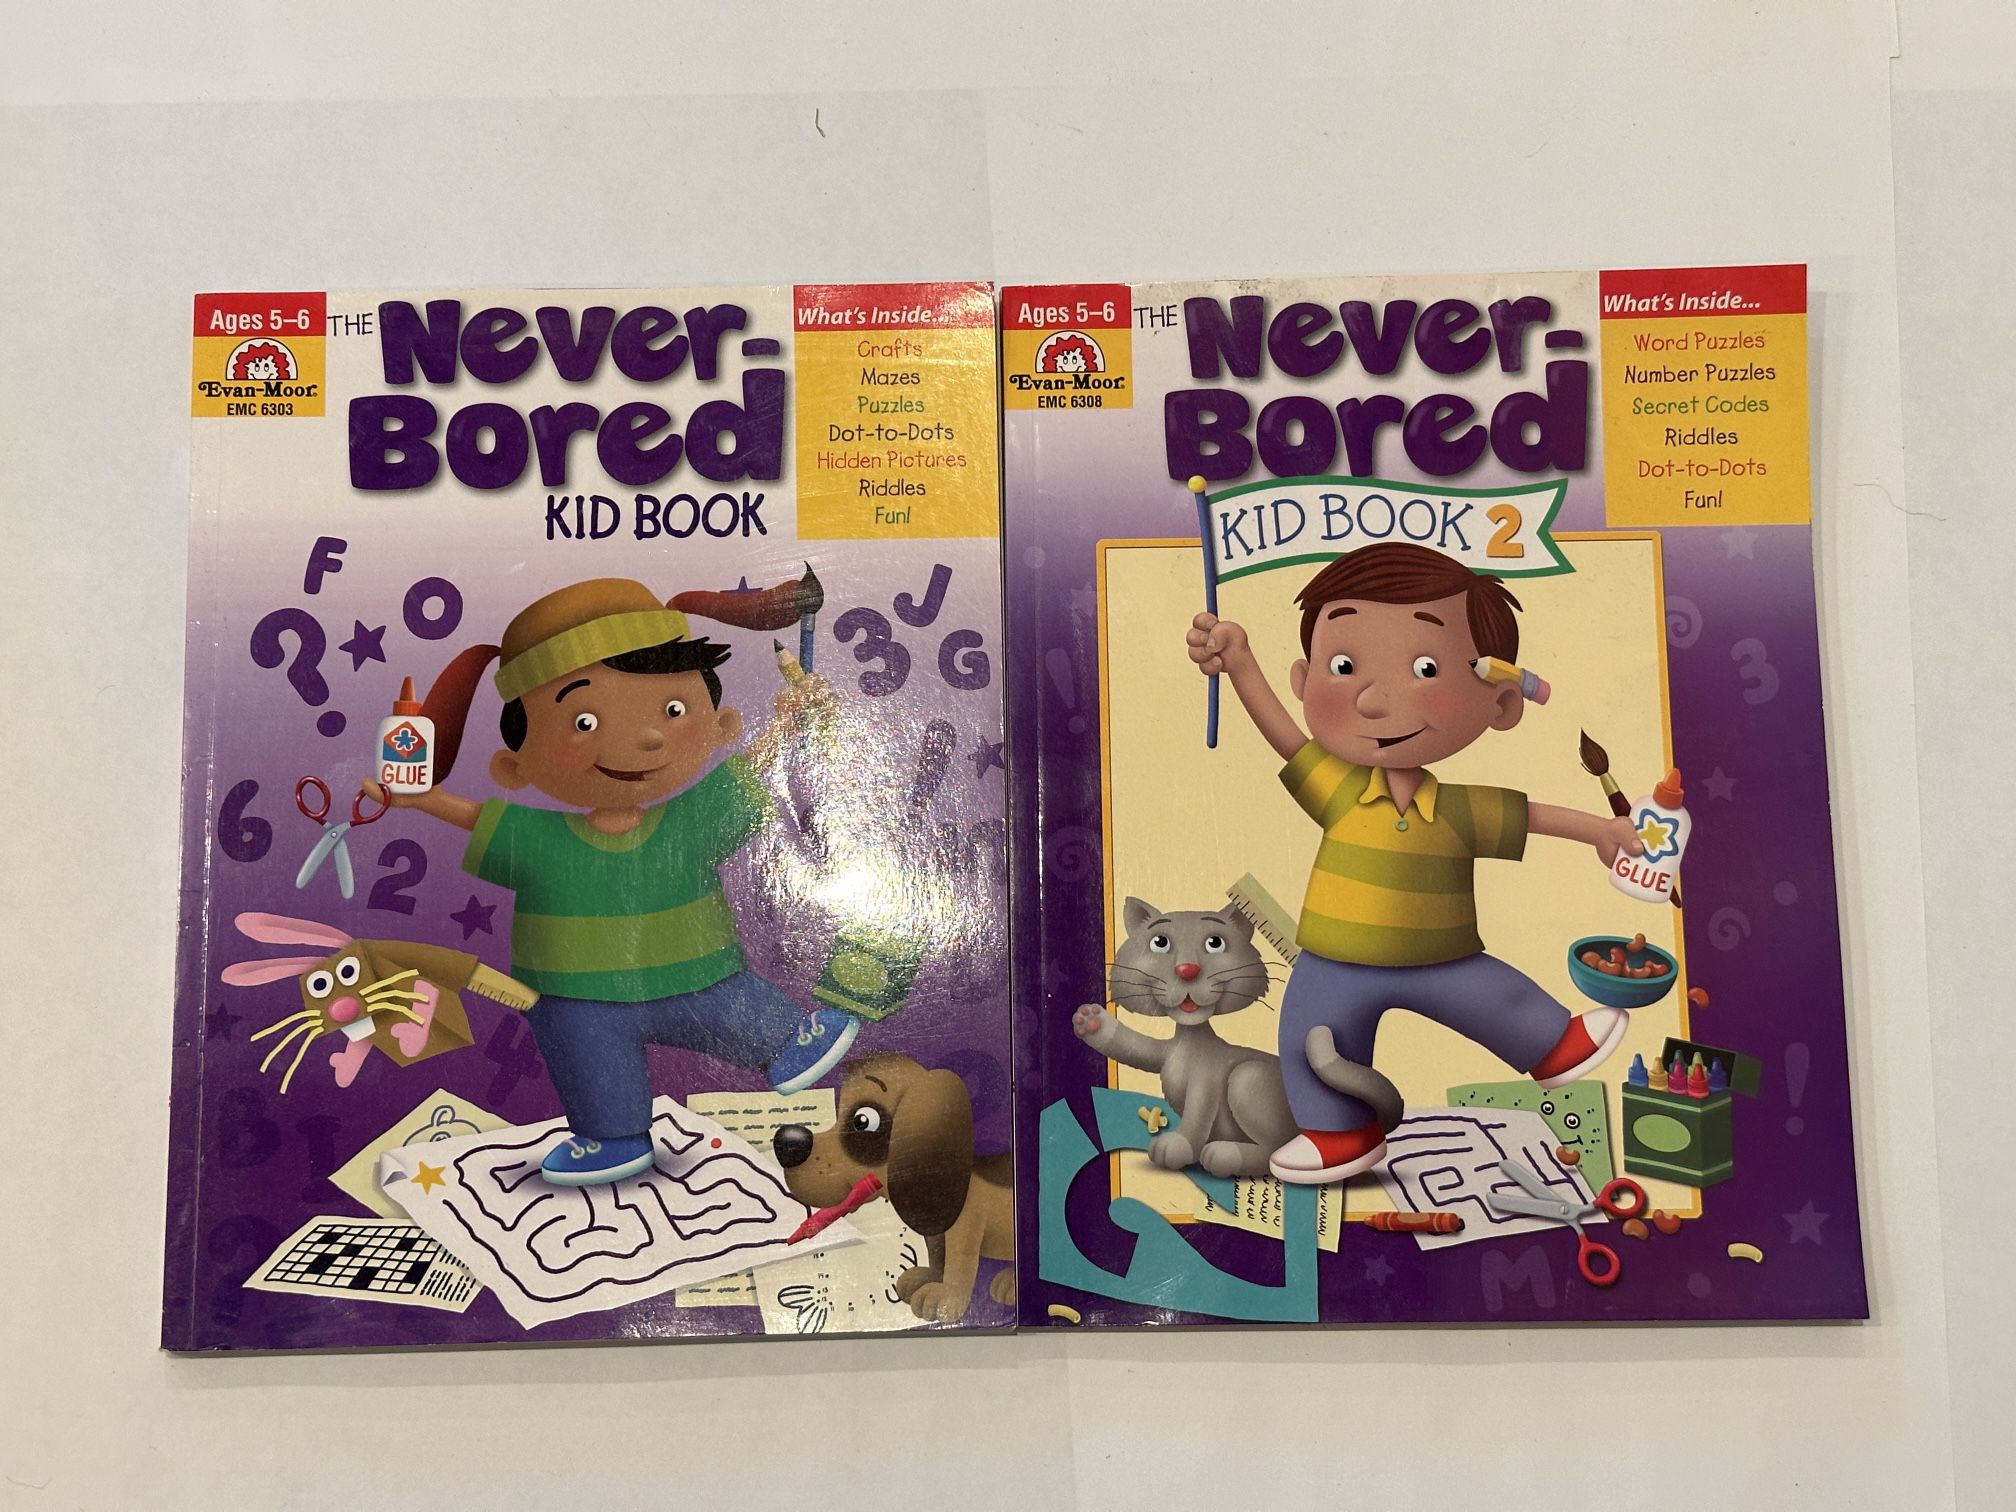 The Never-Bored Kid Book 1 & 2